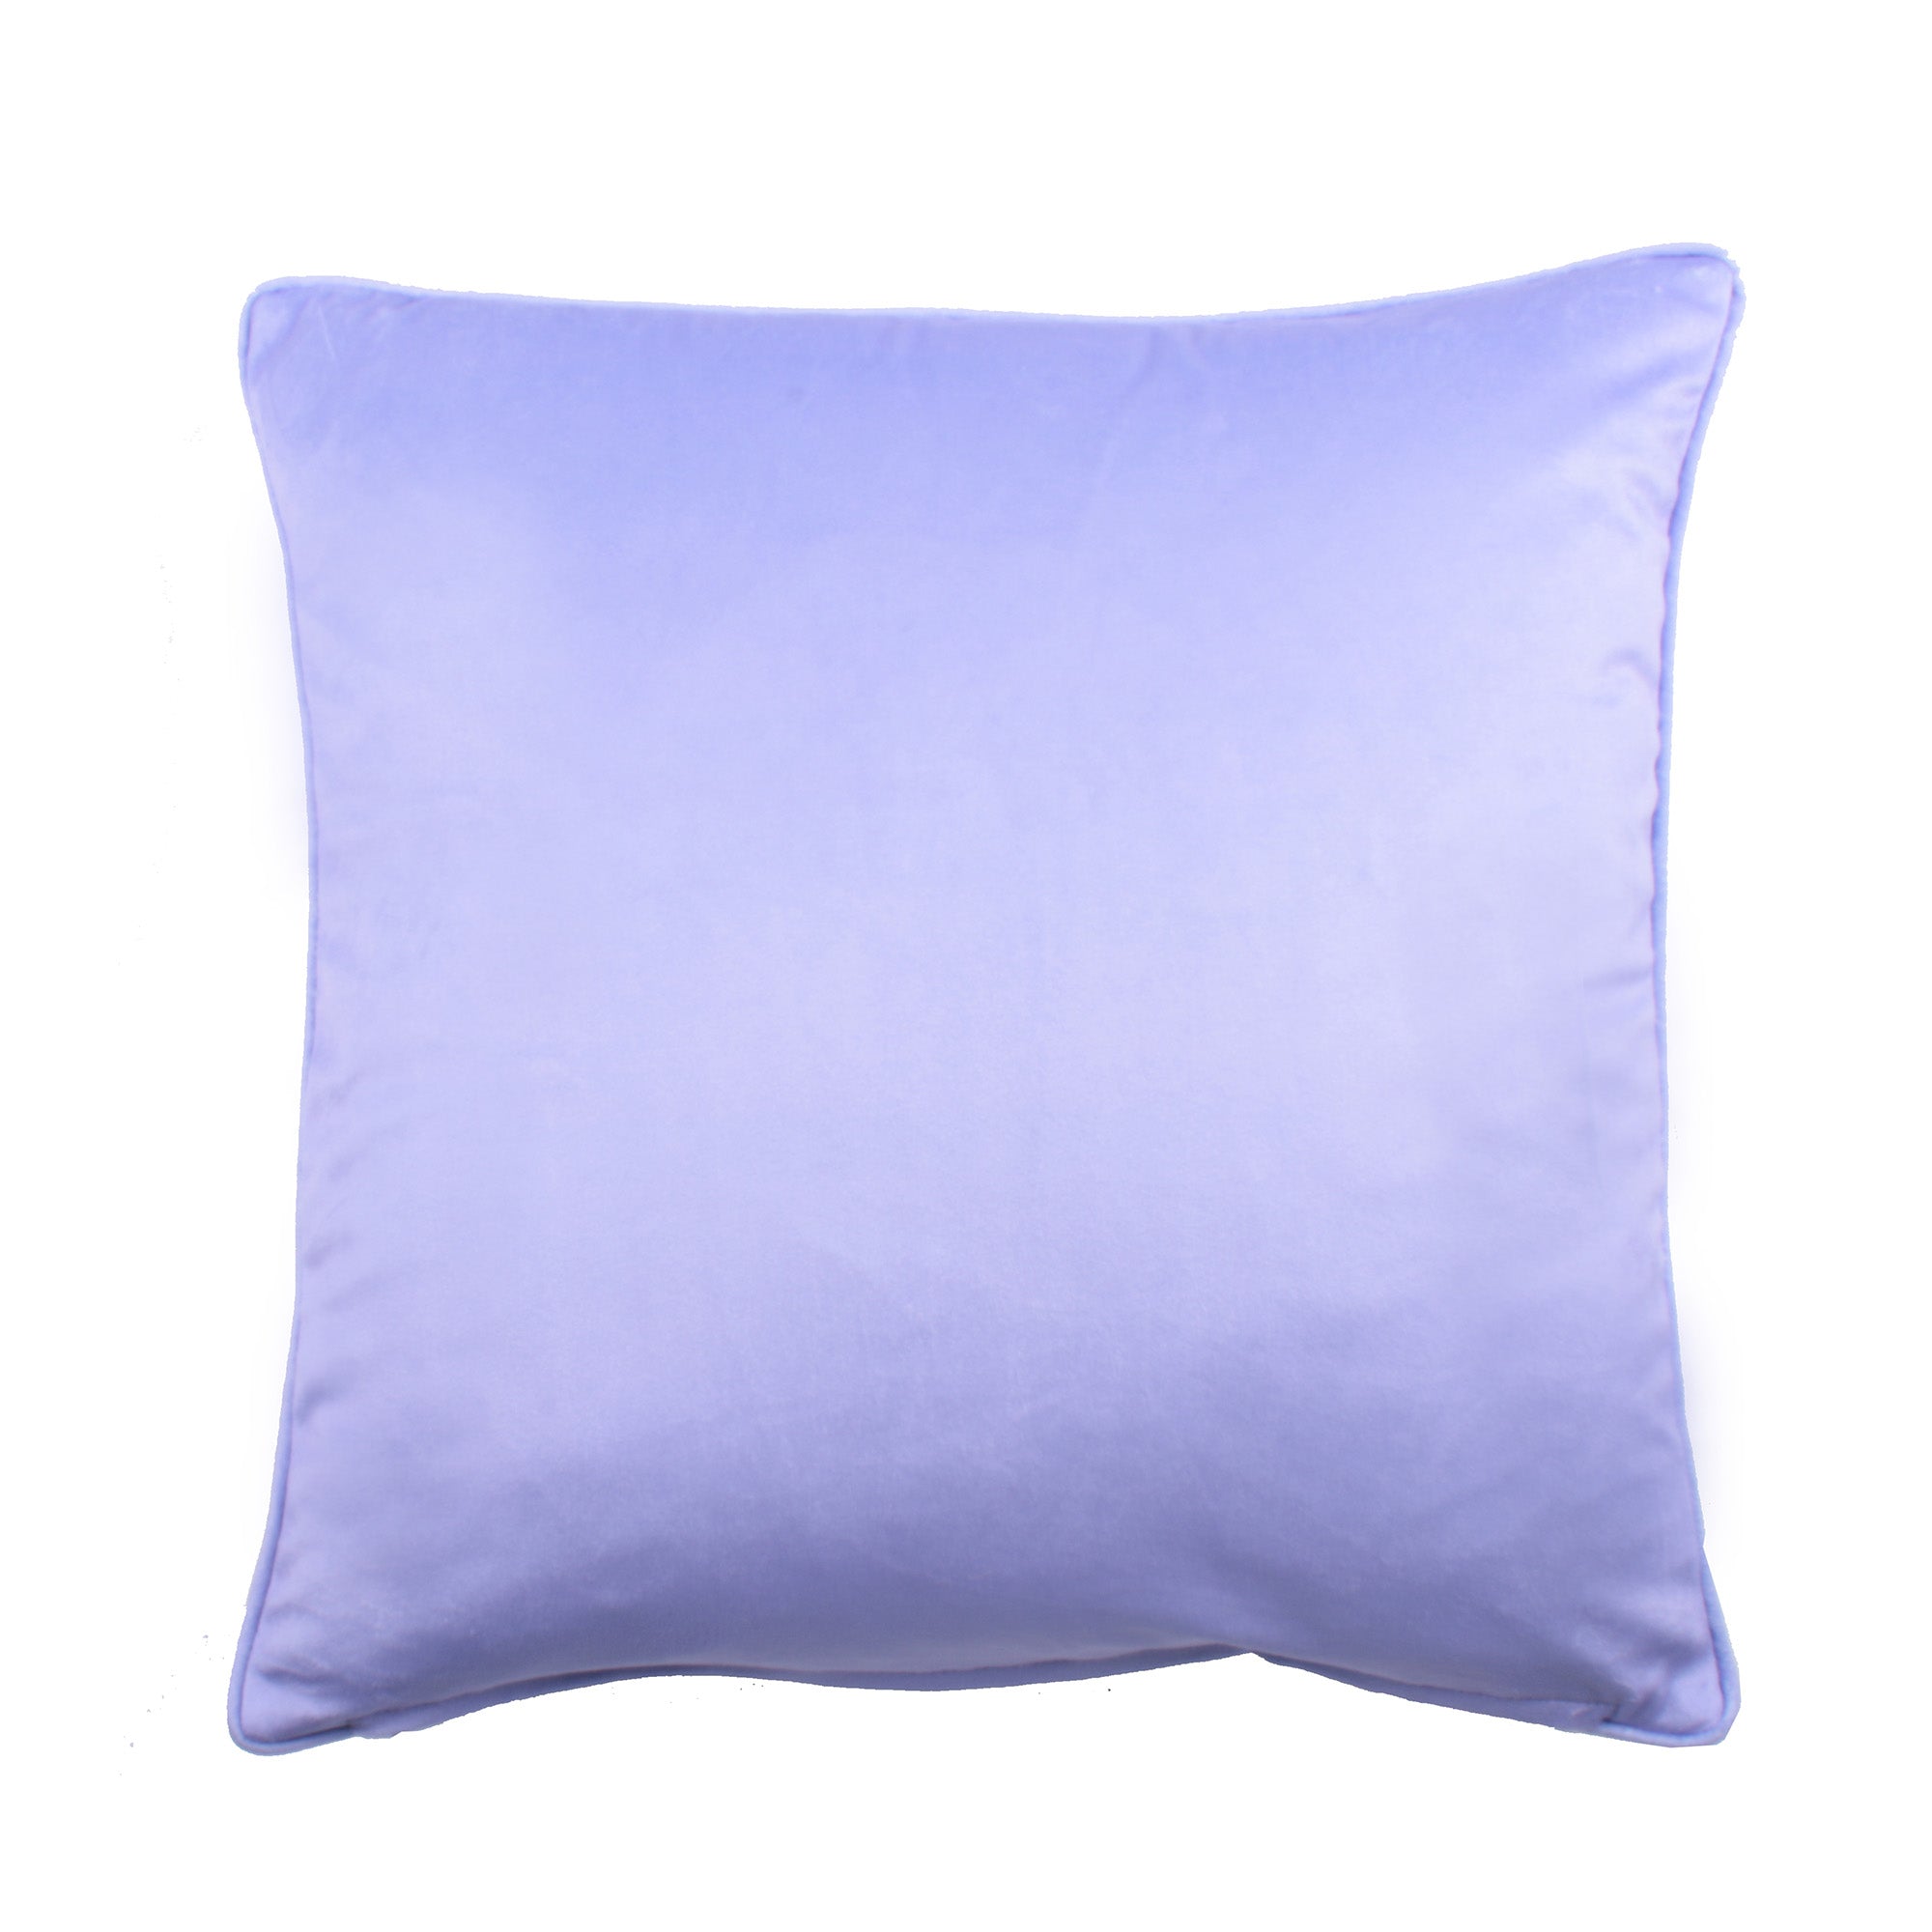 Cushion Cover Unicorn by Bedlam in Pink